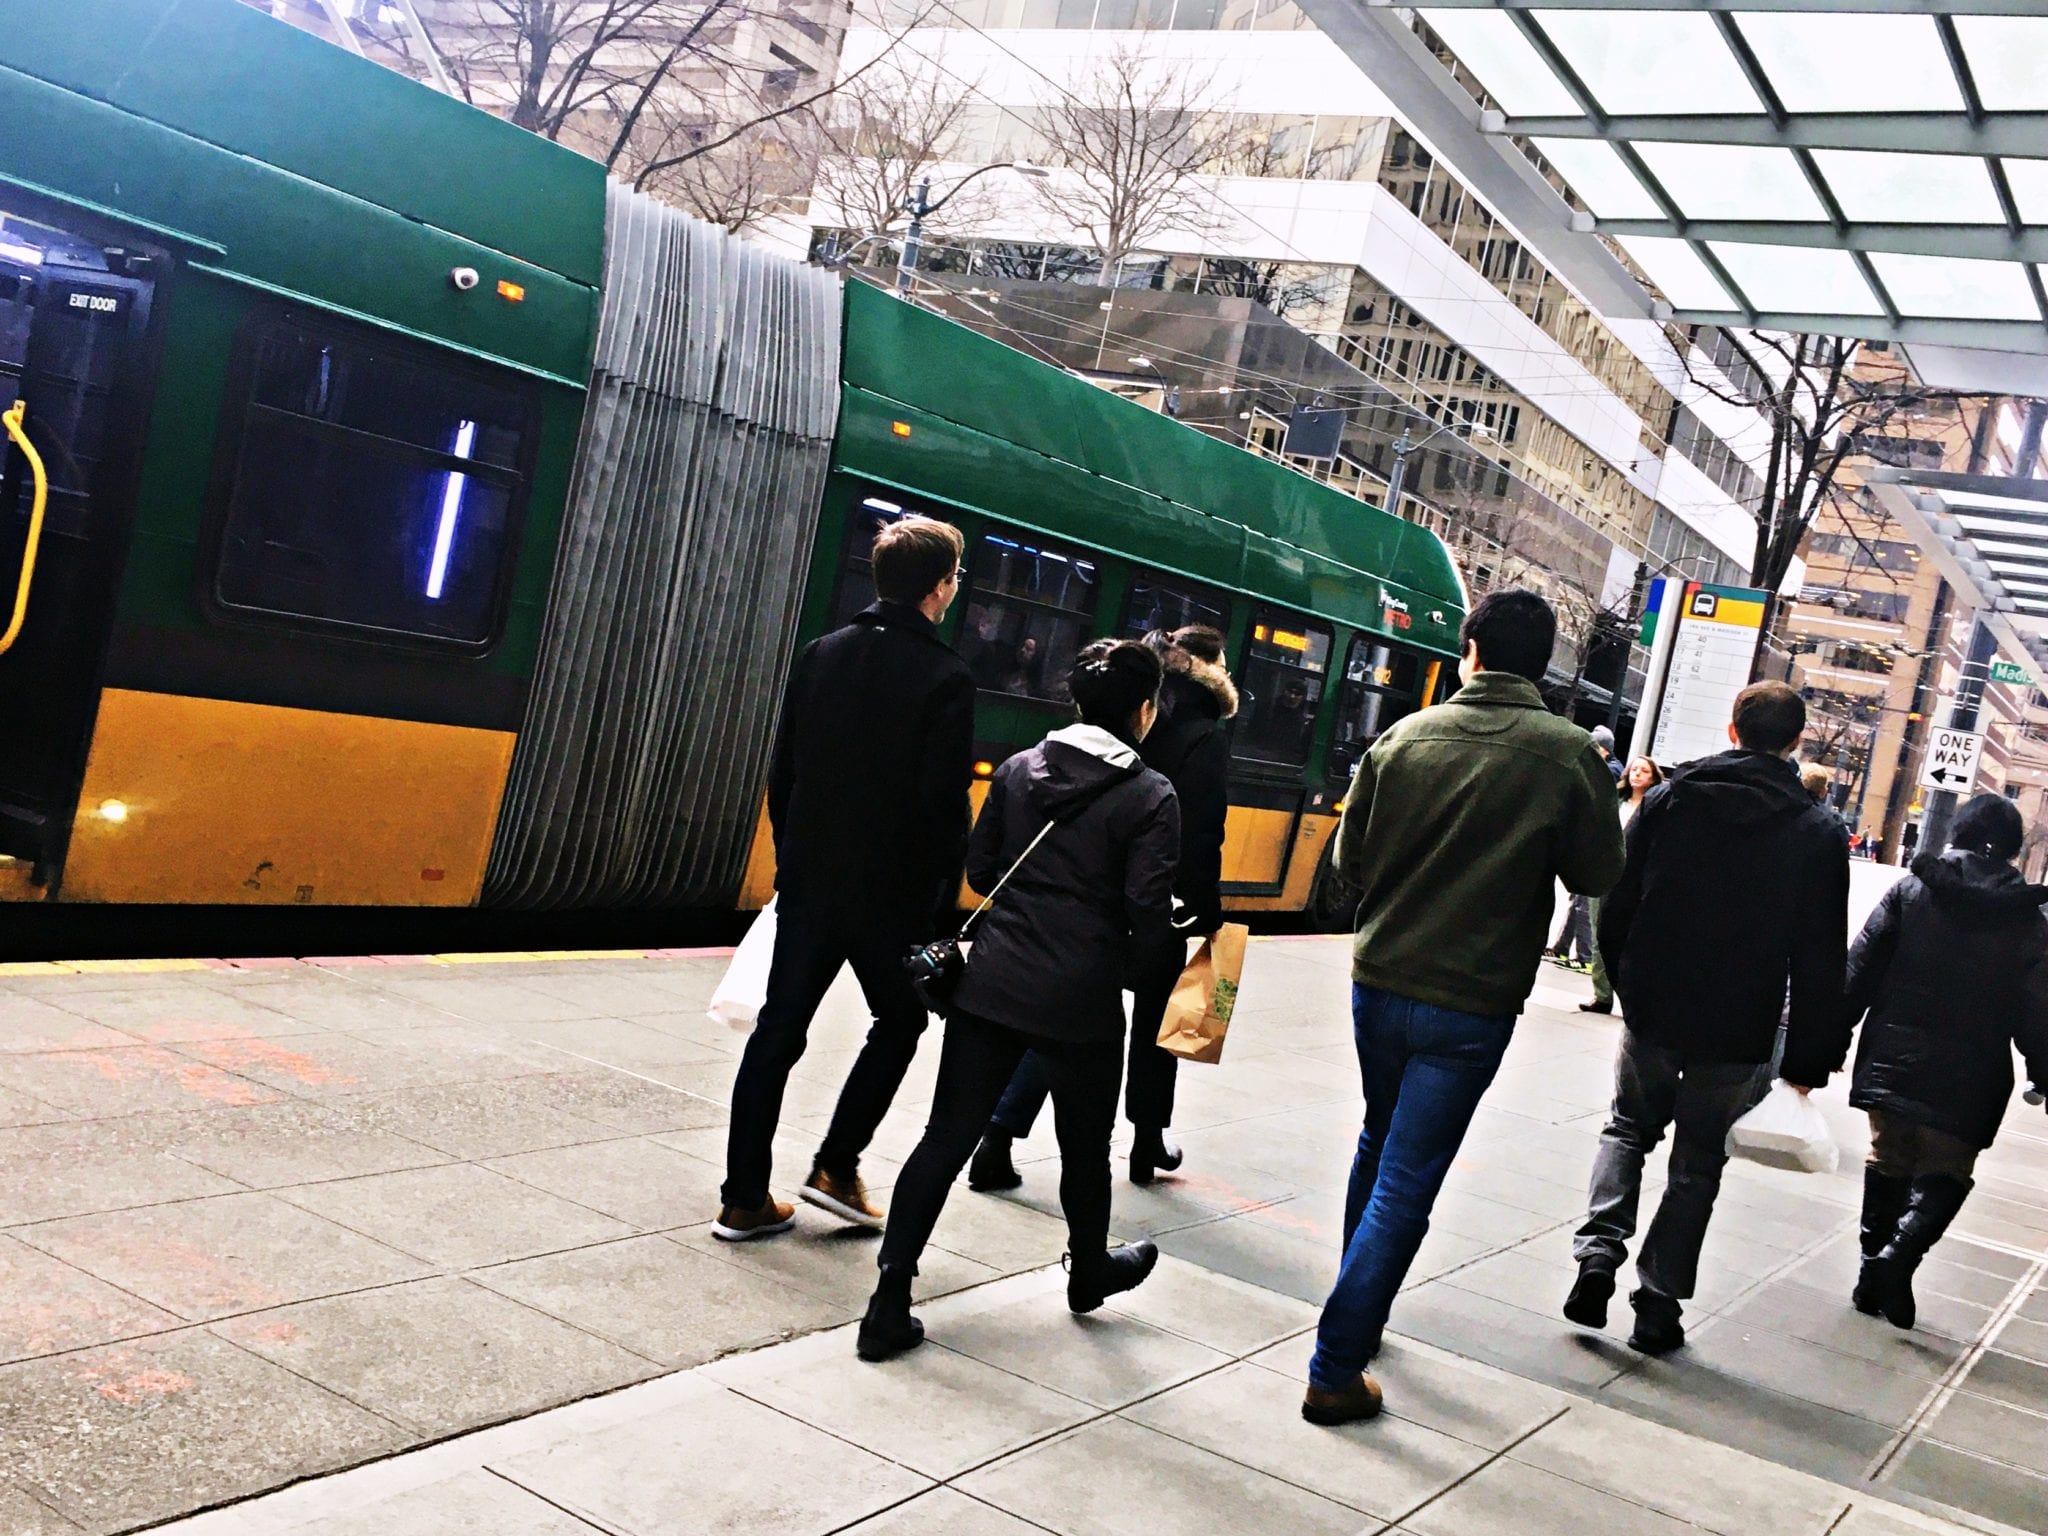 Commuters near a downtown Seattle bus stop.